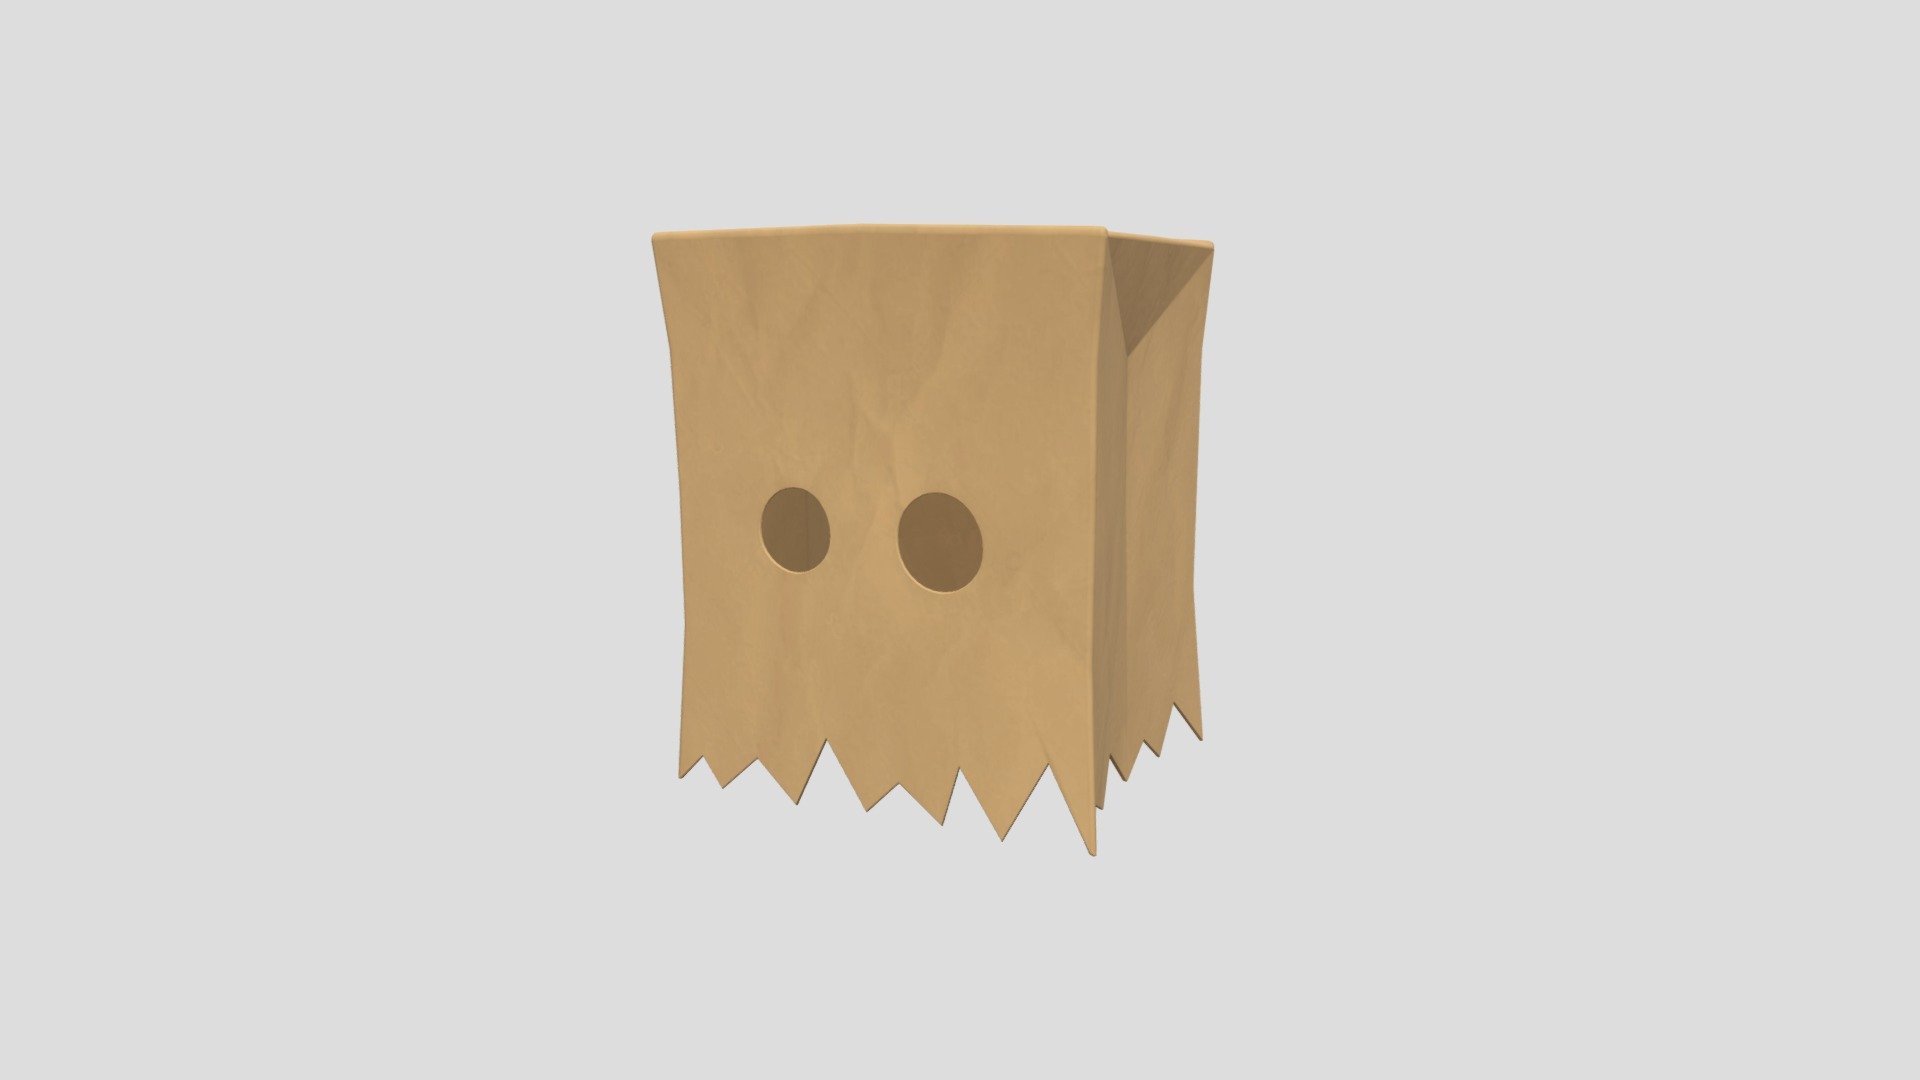 Paper bag

OBJ and 2048x2048 PNG textures

Texture include: Base Color, Normal, Roughness

1,045 vert 1,094 poly - Paper bag - 3D model by -eugenie- 3d model